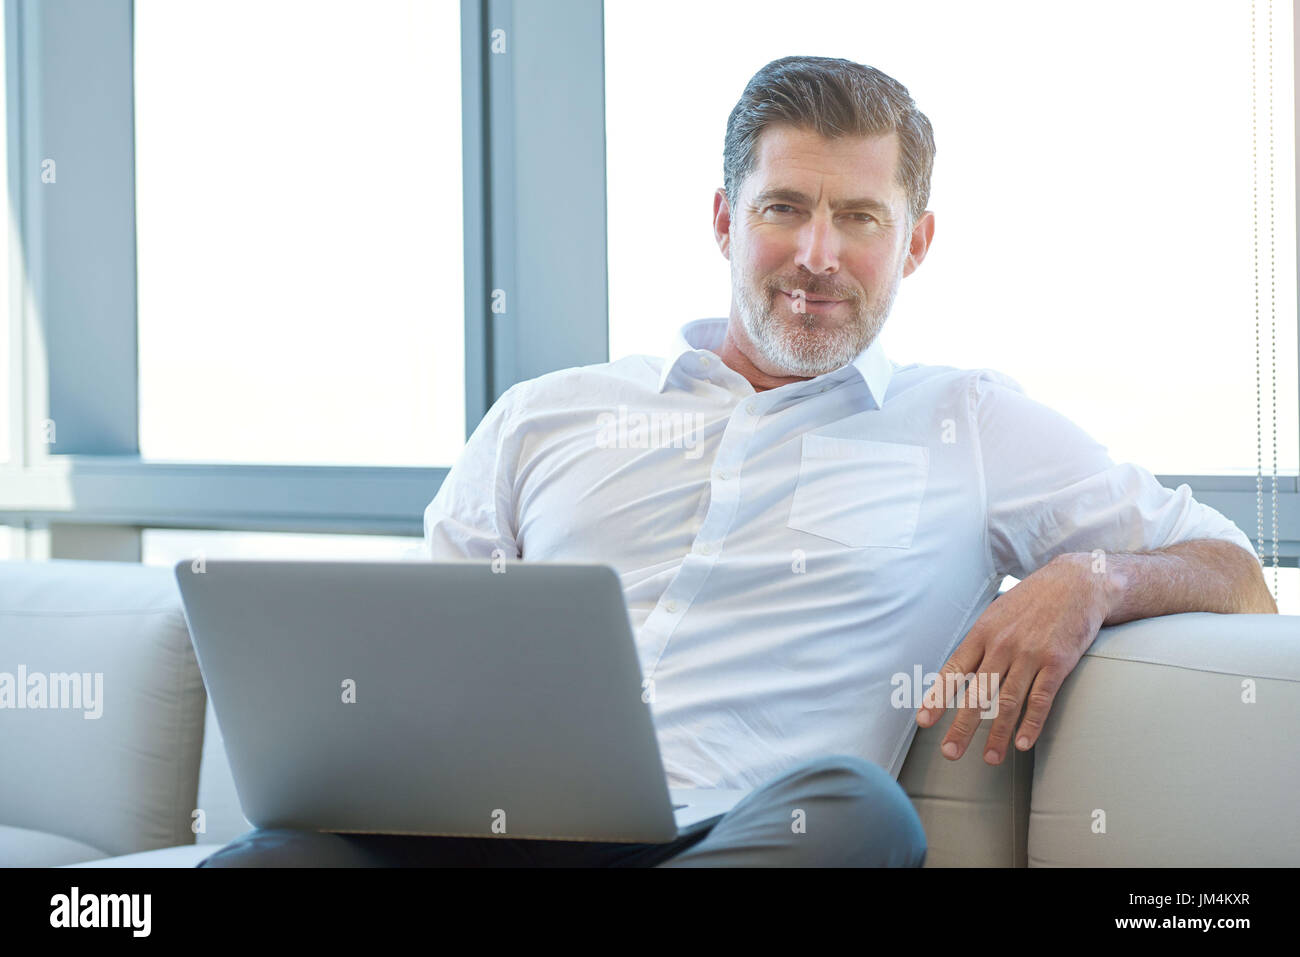 Portrait of a handsome mature businessman relaxing on a couch with a laptop computer, looking positively and confidently at the camera Stock Photo